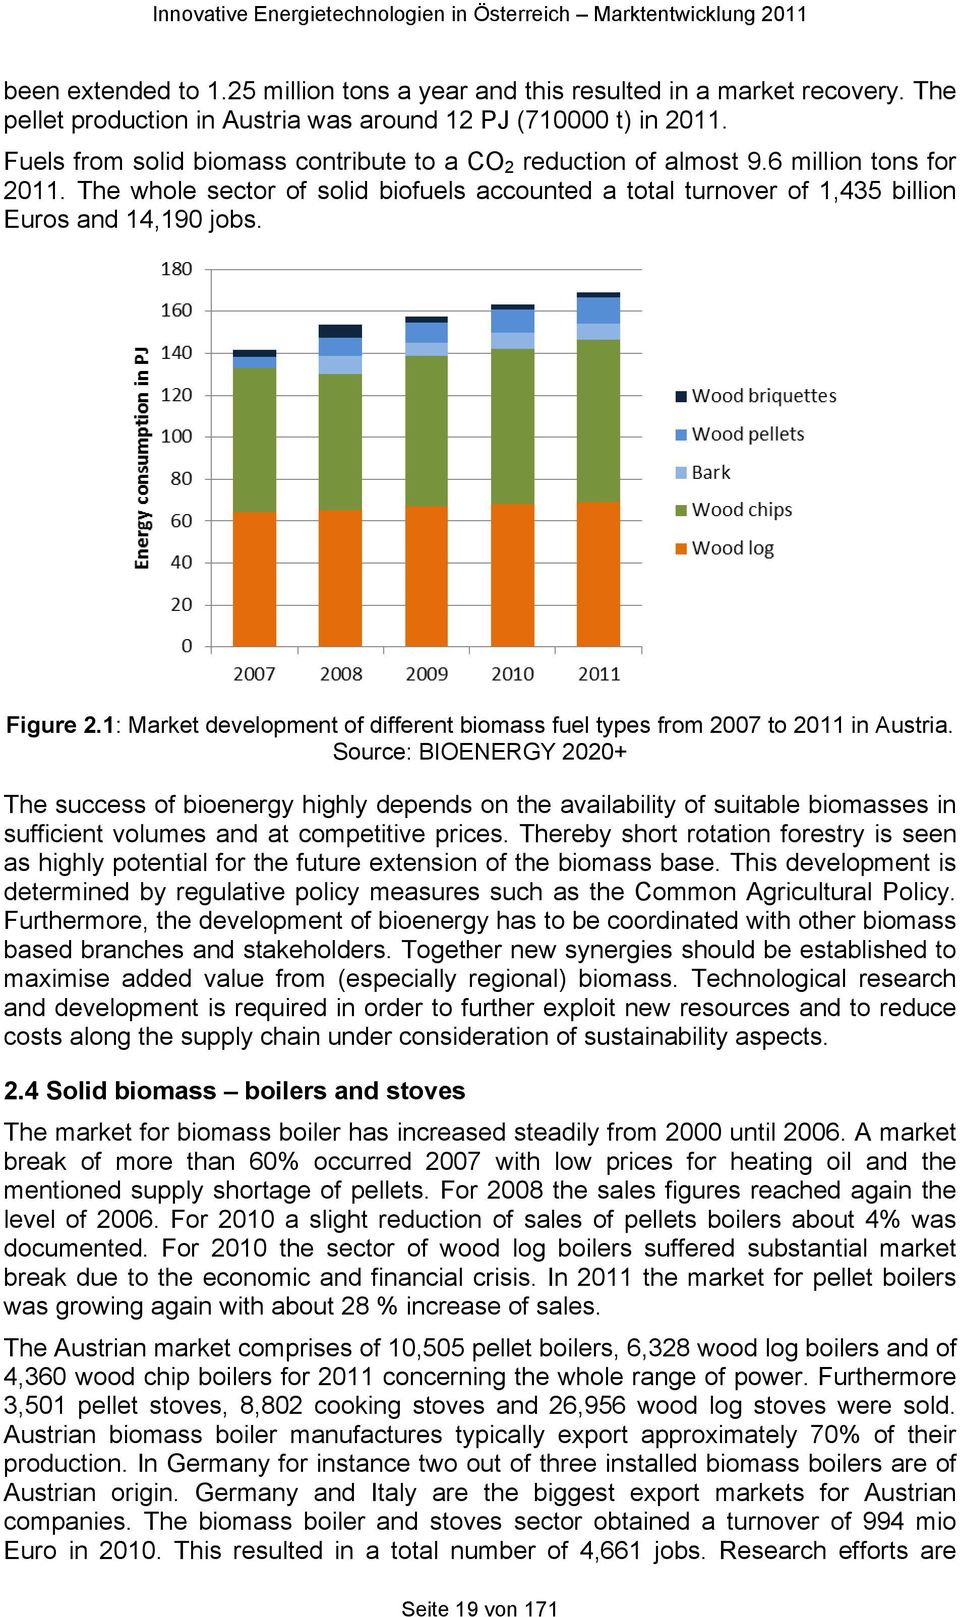 Figure 2.1: Market development of different biomass fuel types from 2007 to 2011 in Austria.